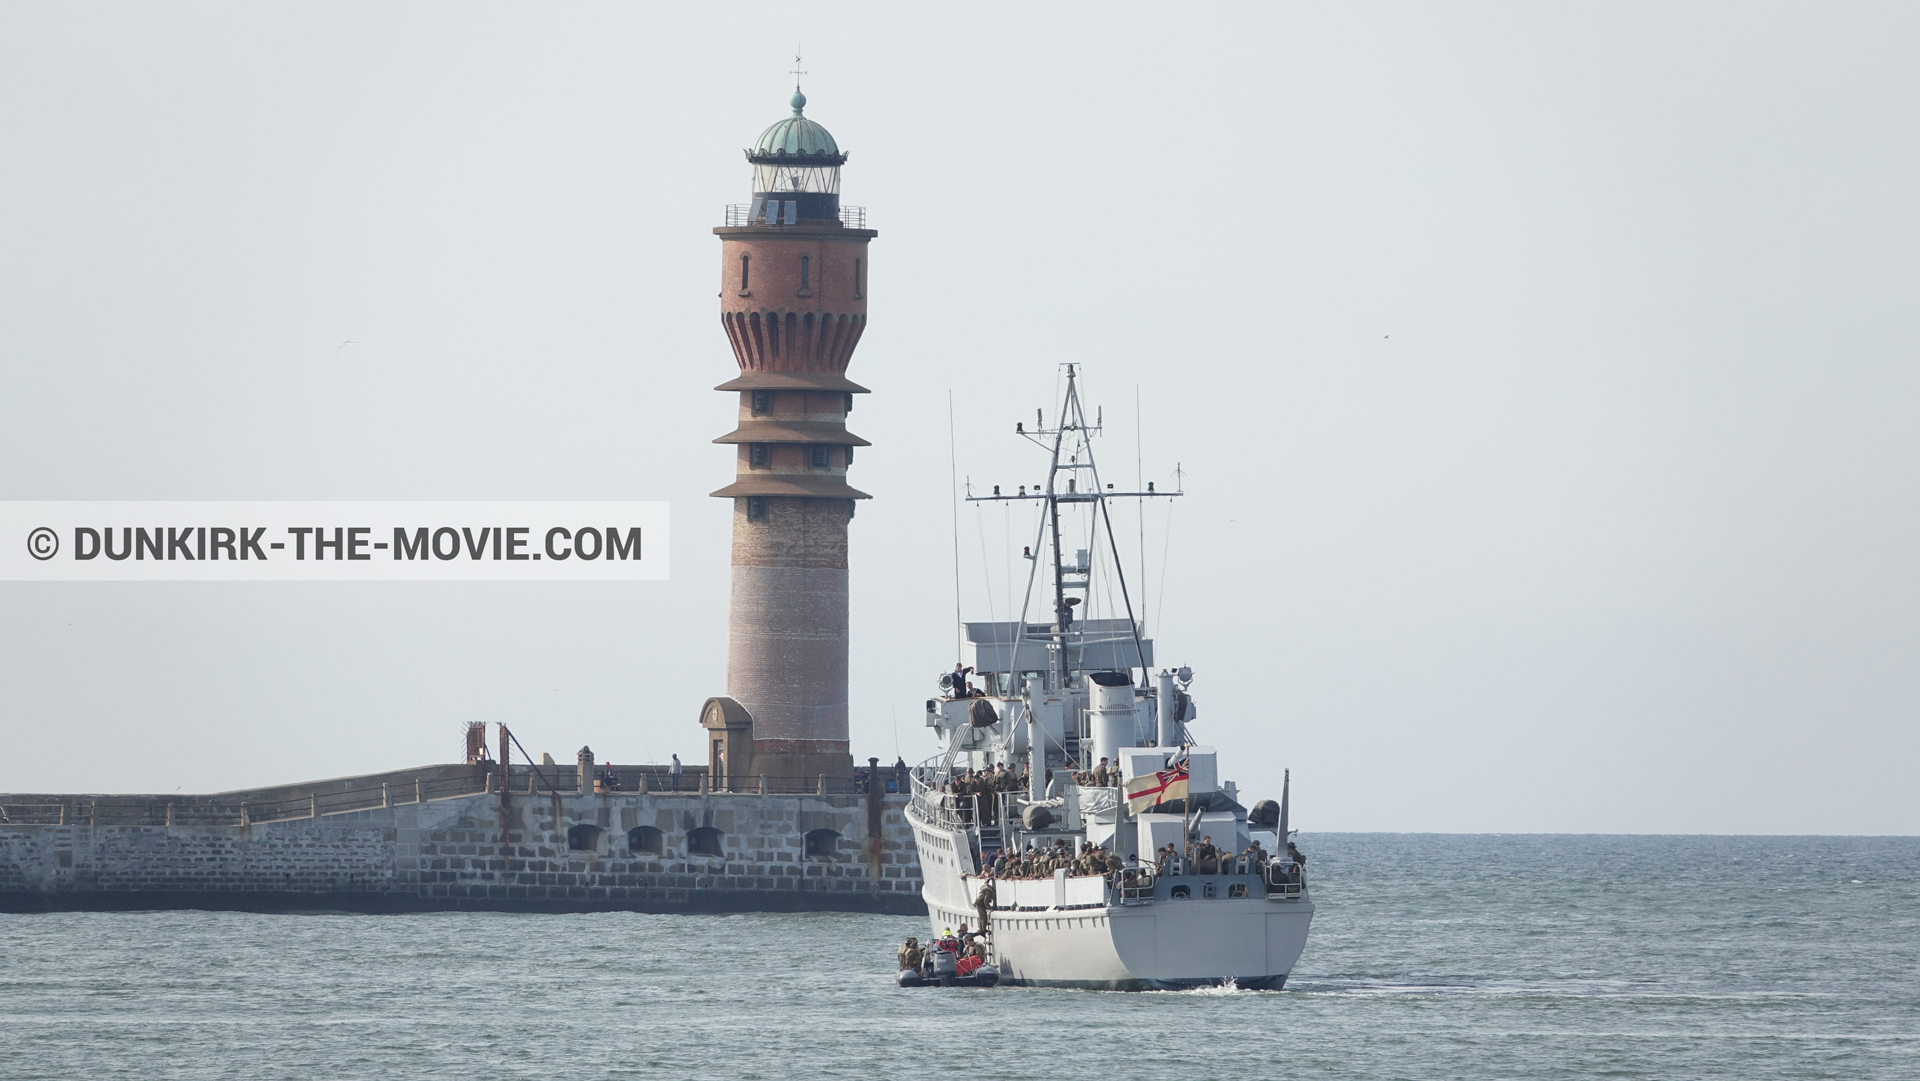 Picture with F34 - Hr.Ms. Sittard, calm sea, St Pol sur Mer lighthouse,  from behind the scene of the Dunkirk movie by Nolan